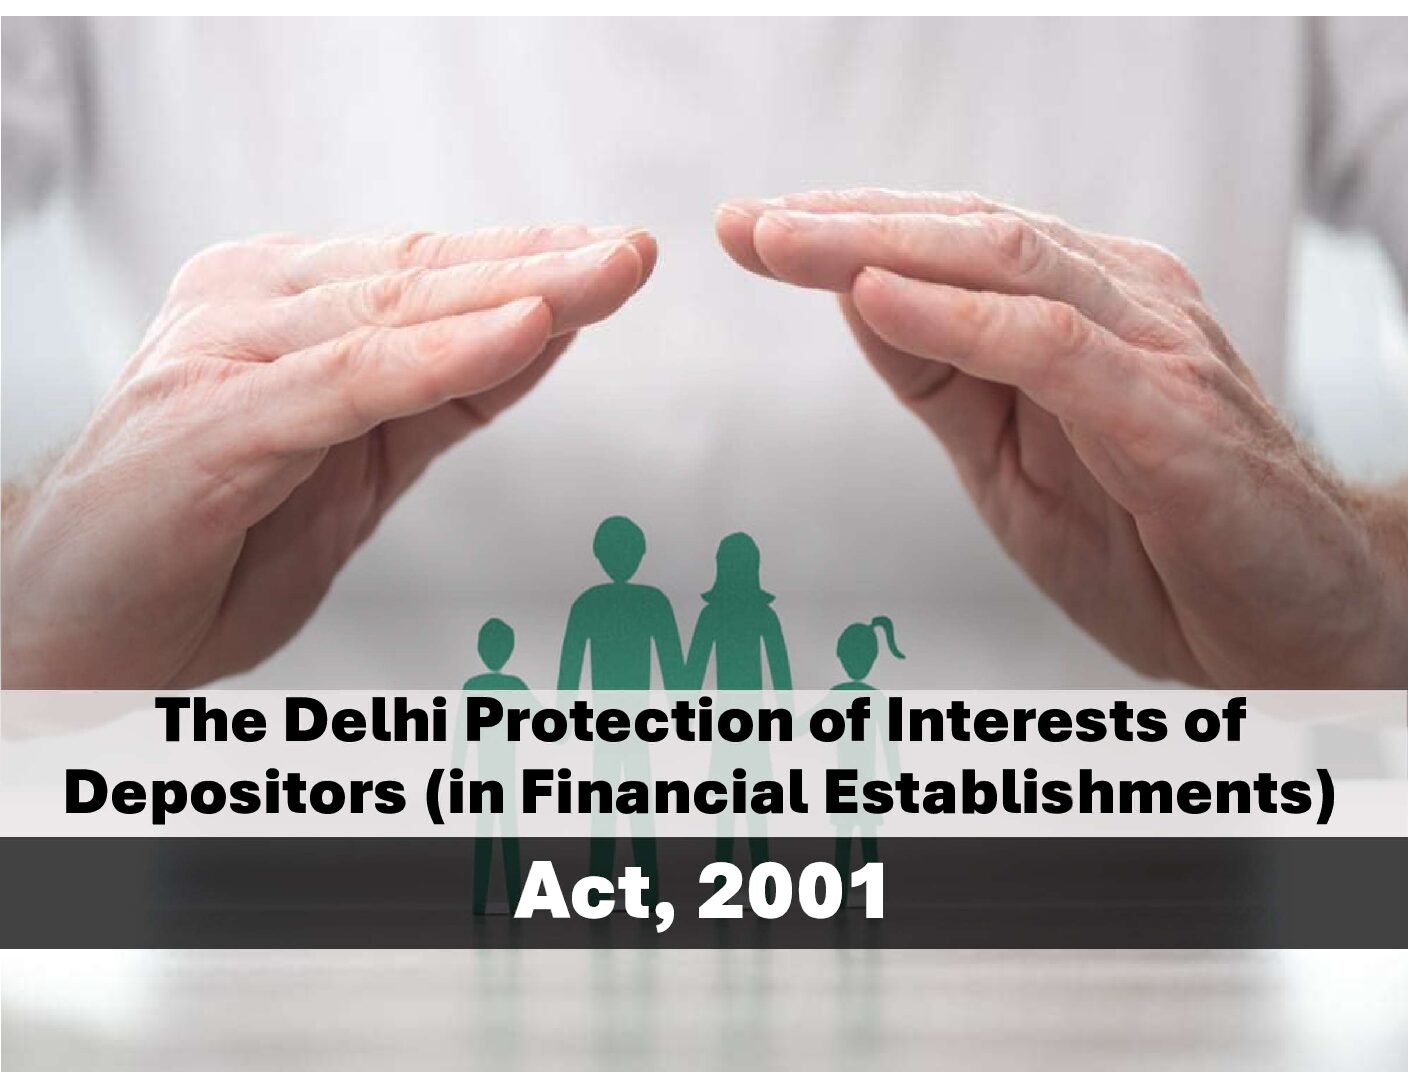 The Delhi Protection of Interests of Depositors (in Financial Establishments) Act, 2001